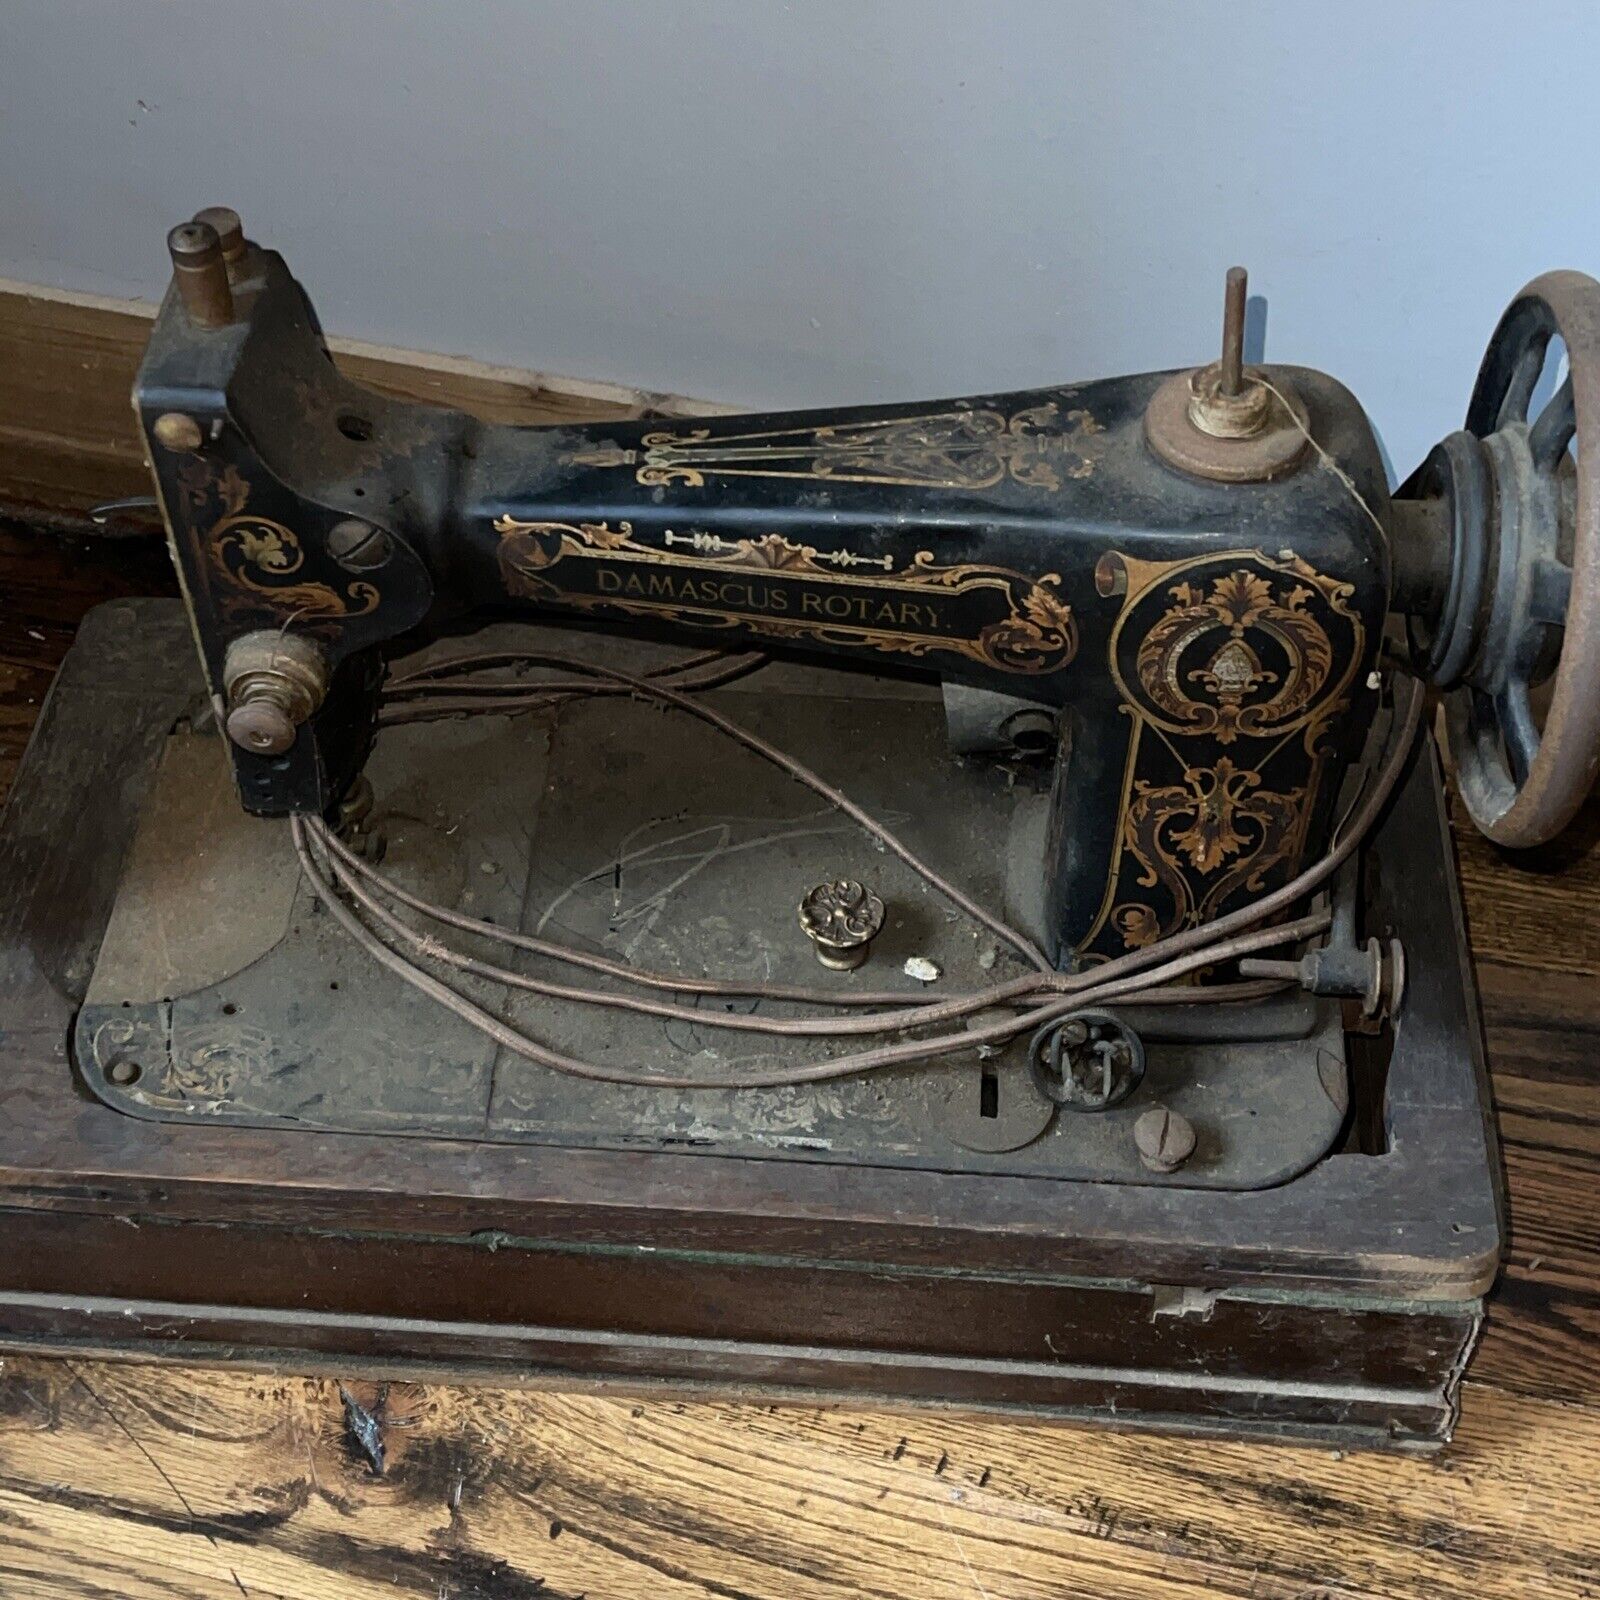 VTG Damascus Rotary Sewing Machine For Parts And Display Nostalgia, Not Working